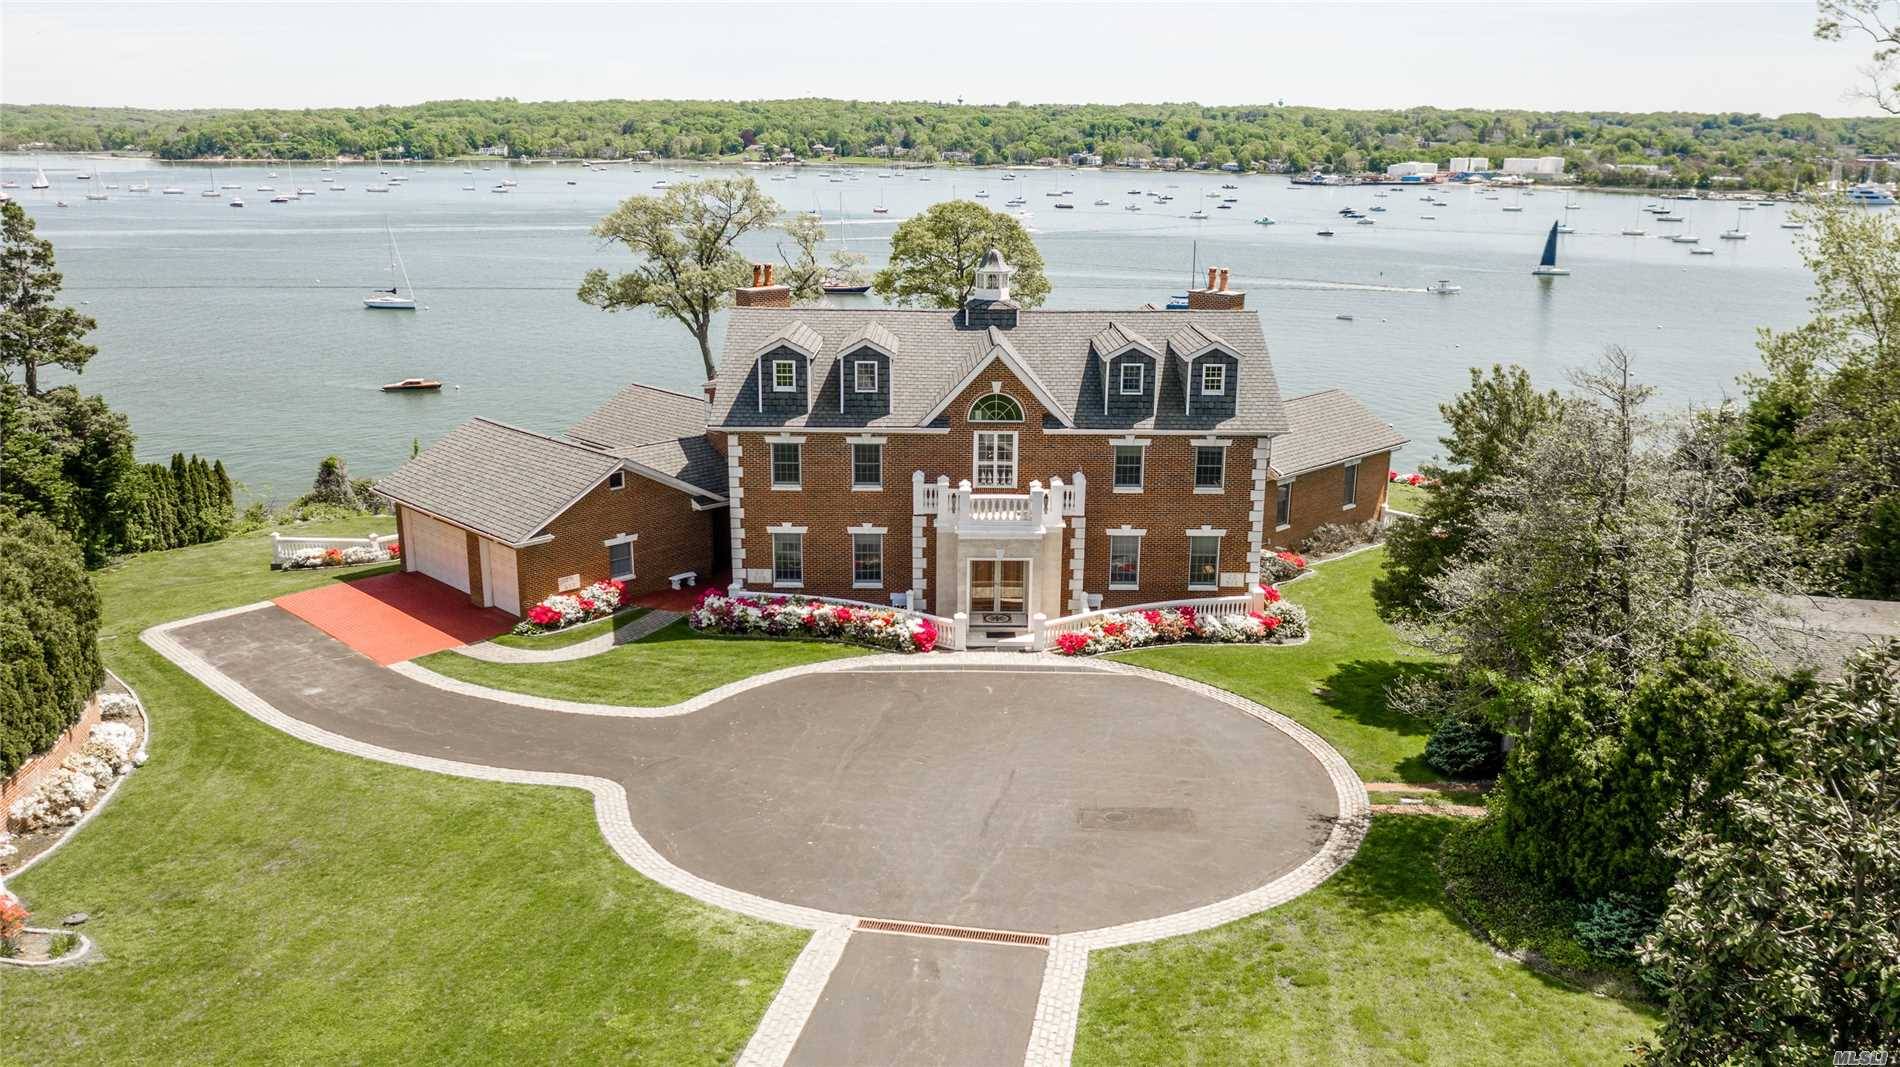 Centre Island, Stately Brick Colonial Style Manor Home, Perched On 3.